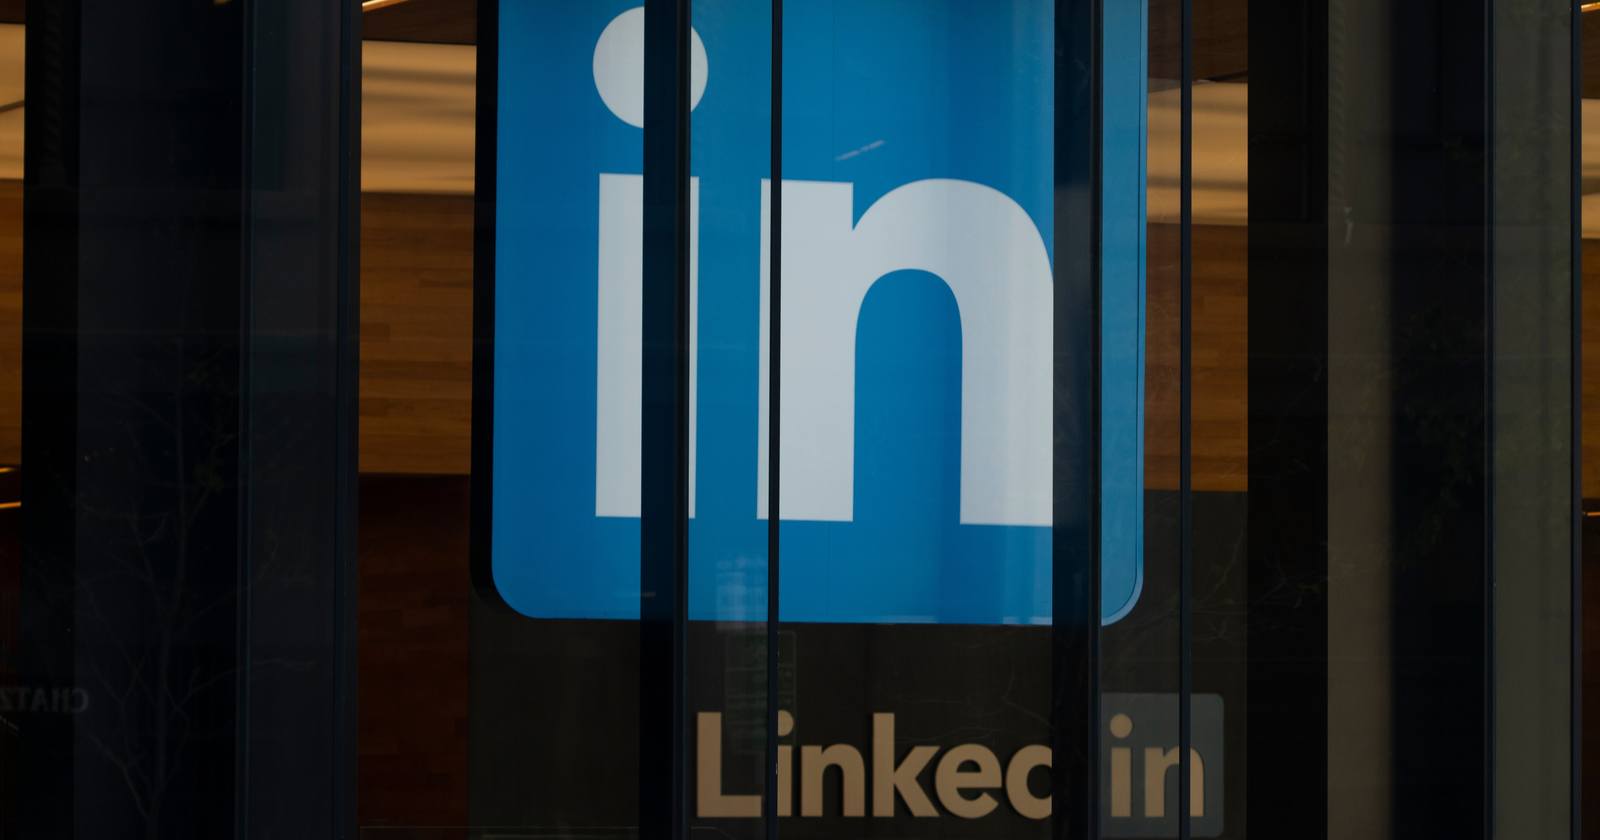 LinkedIn Lists This Year’s Top 25 Marketing & Advertising Companies via @sejournal, @MattGSouthern